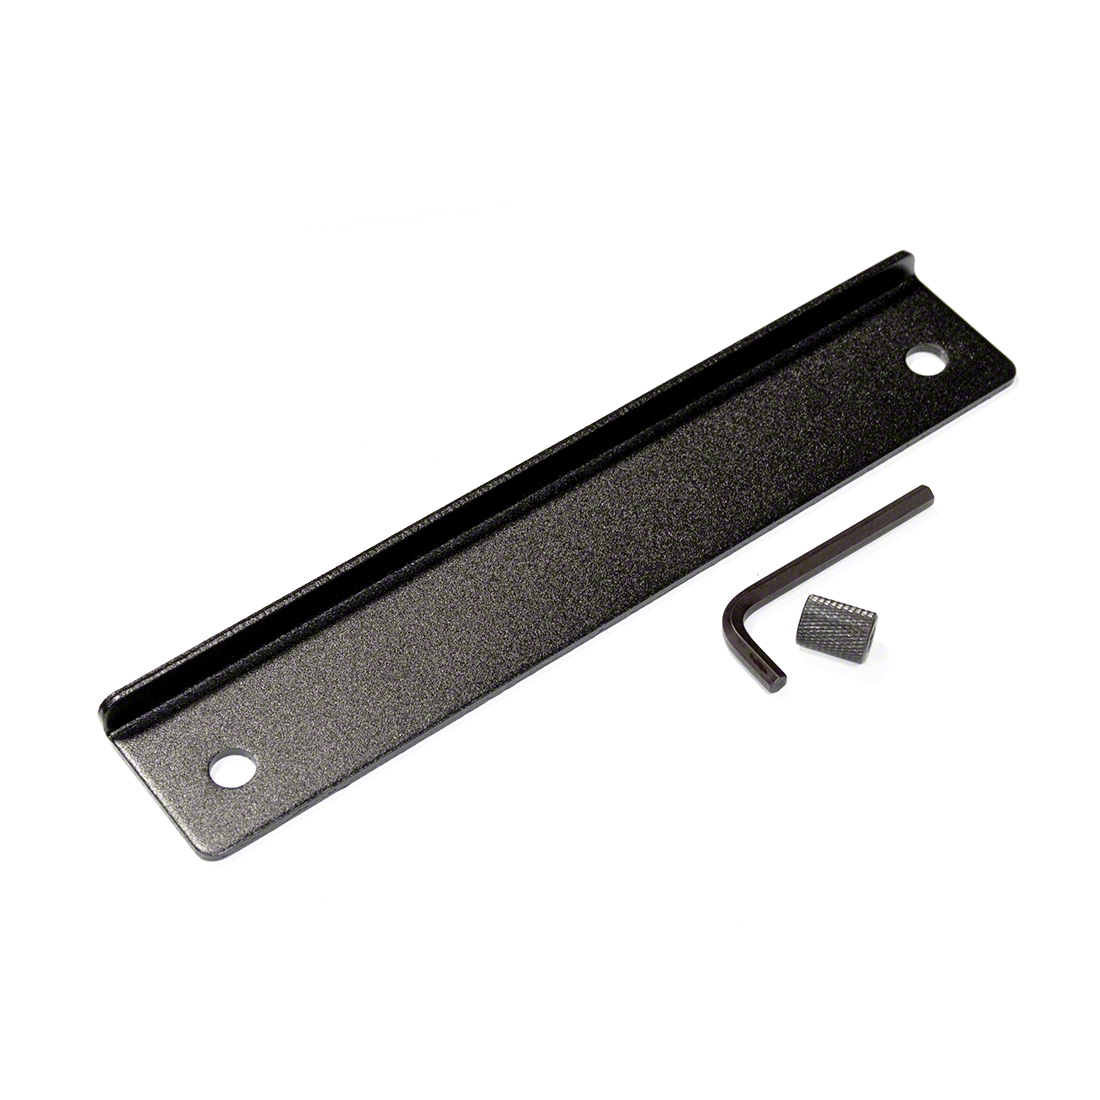 IntelliStage Brackets for Perimiter Frame to Frame Connections (4-pack)